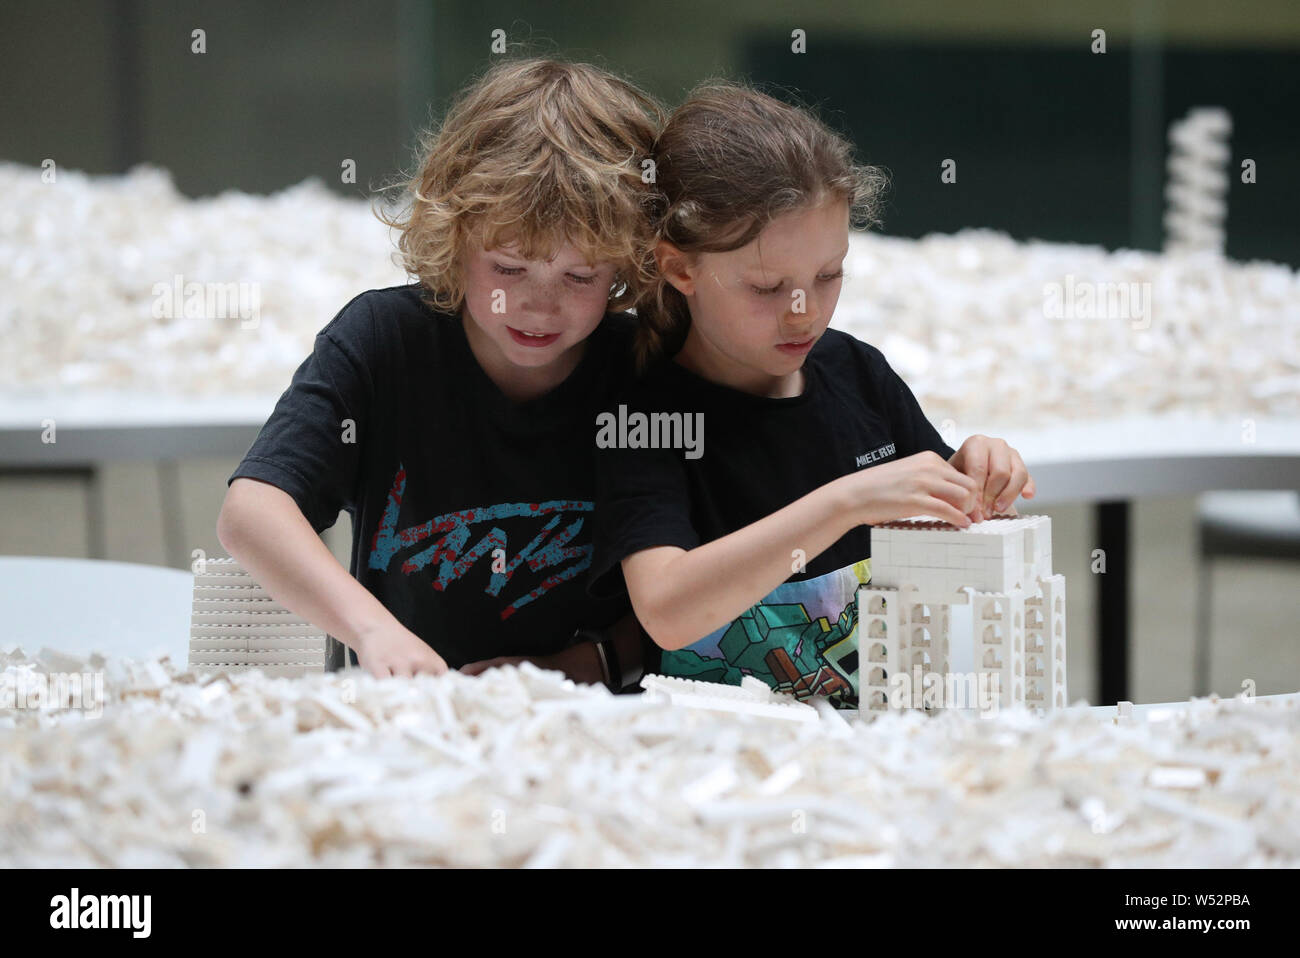 Hunter Tagholm (left) and Finn Beale (right), both aged 8, begin putting together some of the tonne of Lego bricks for Olafur Eliasson's cubic structural evolution project 2004 artwork in the Tate Modern's Turbine Hall, London. Stock Photo